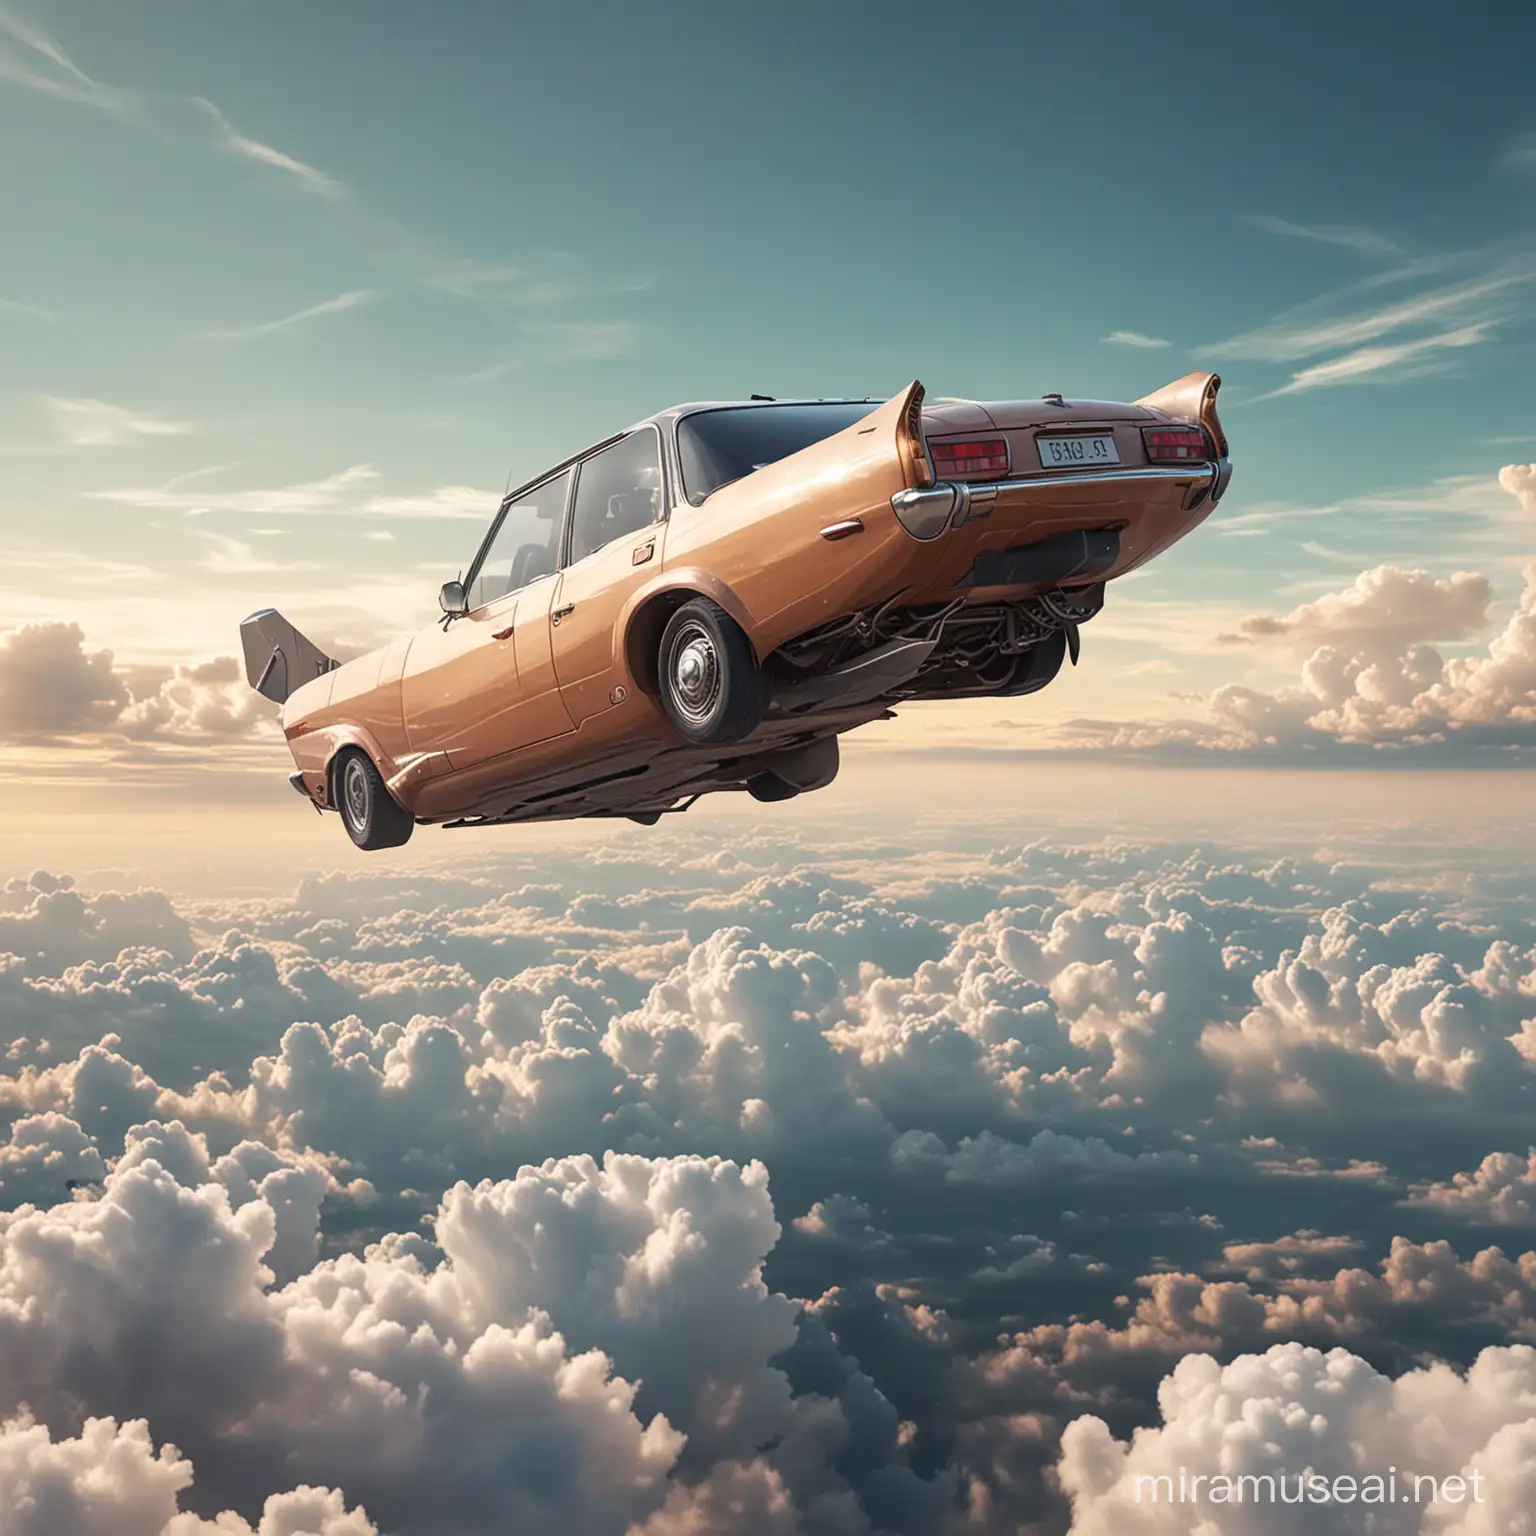 An imaginary car that flies in the sky by itself.